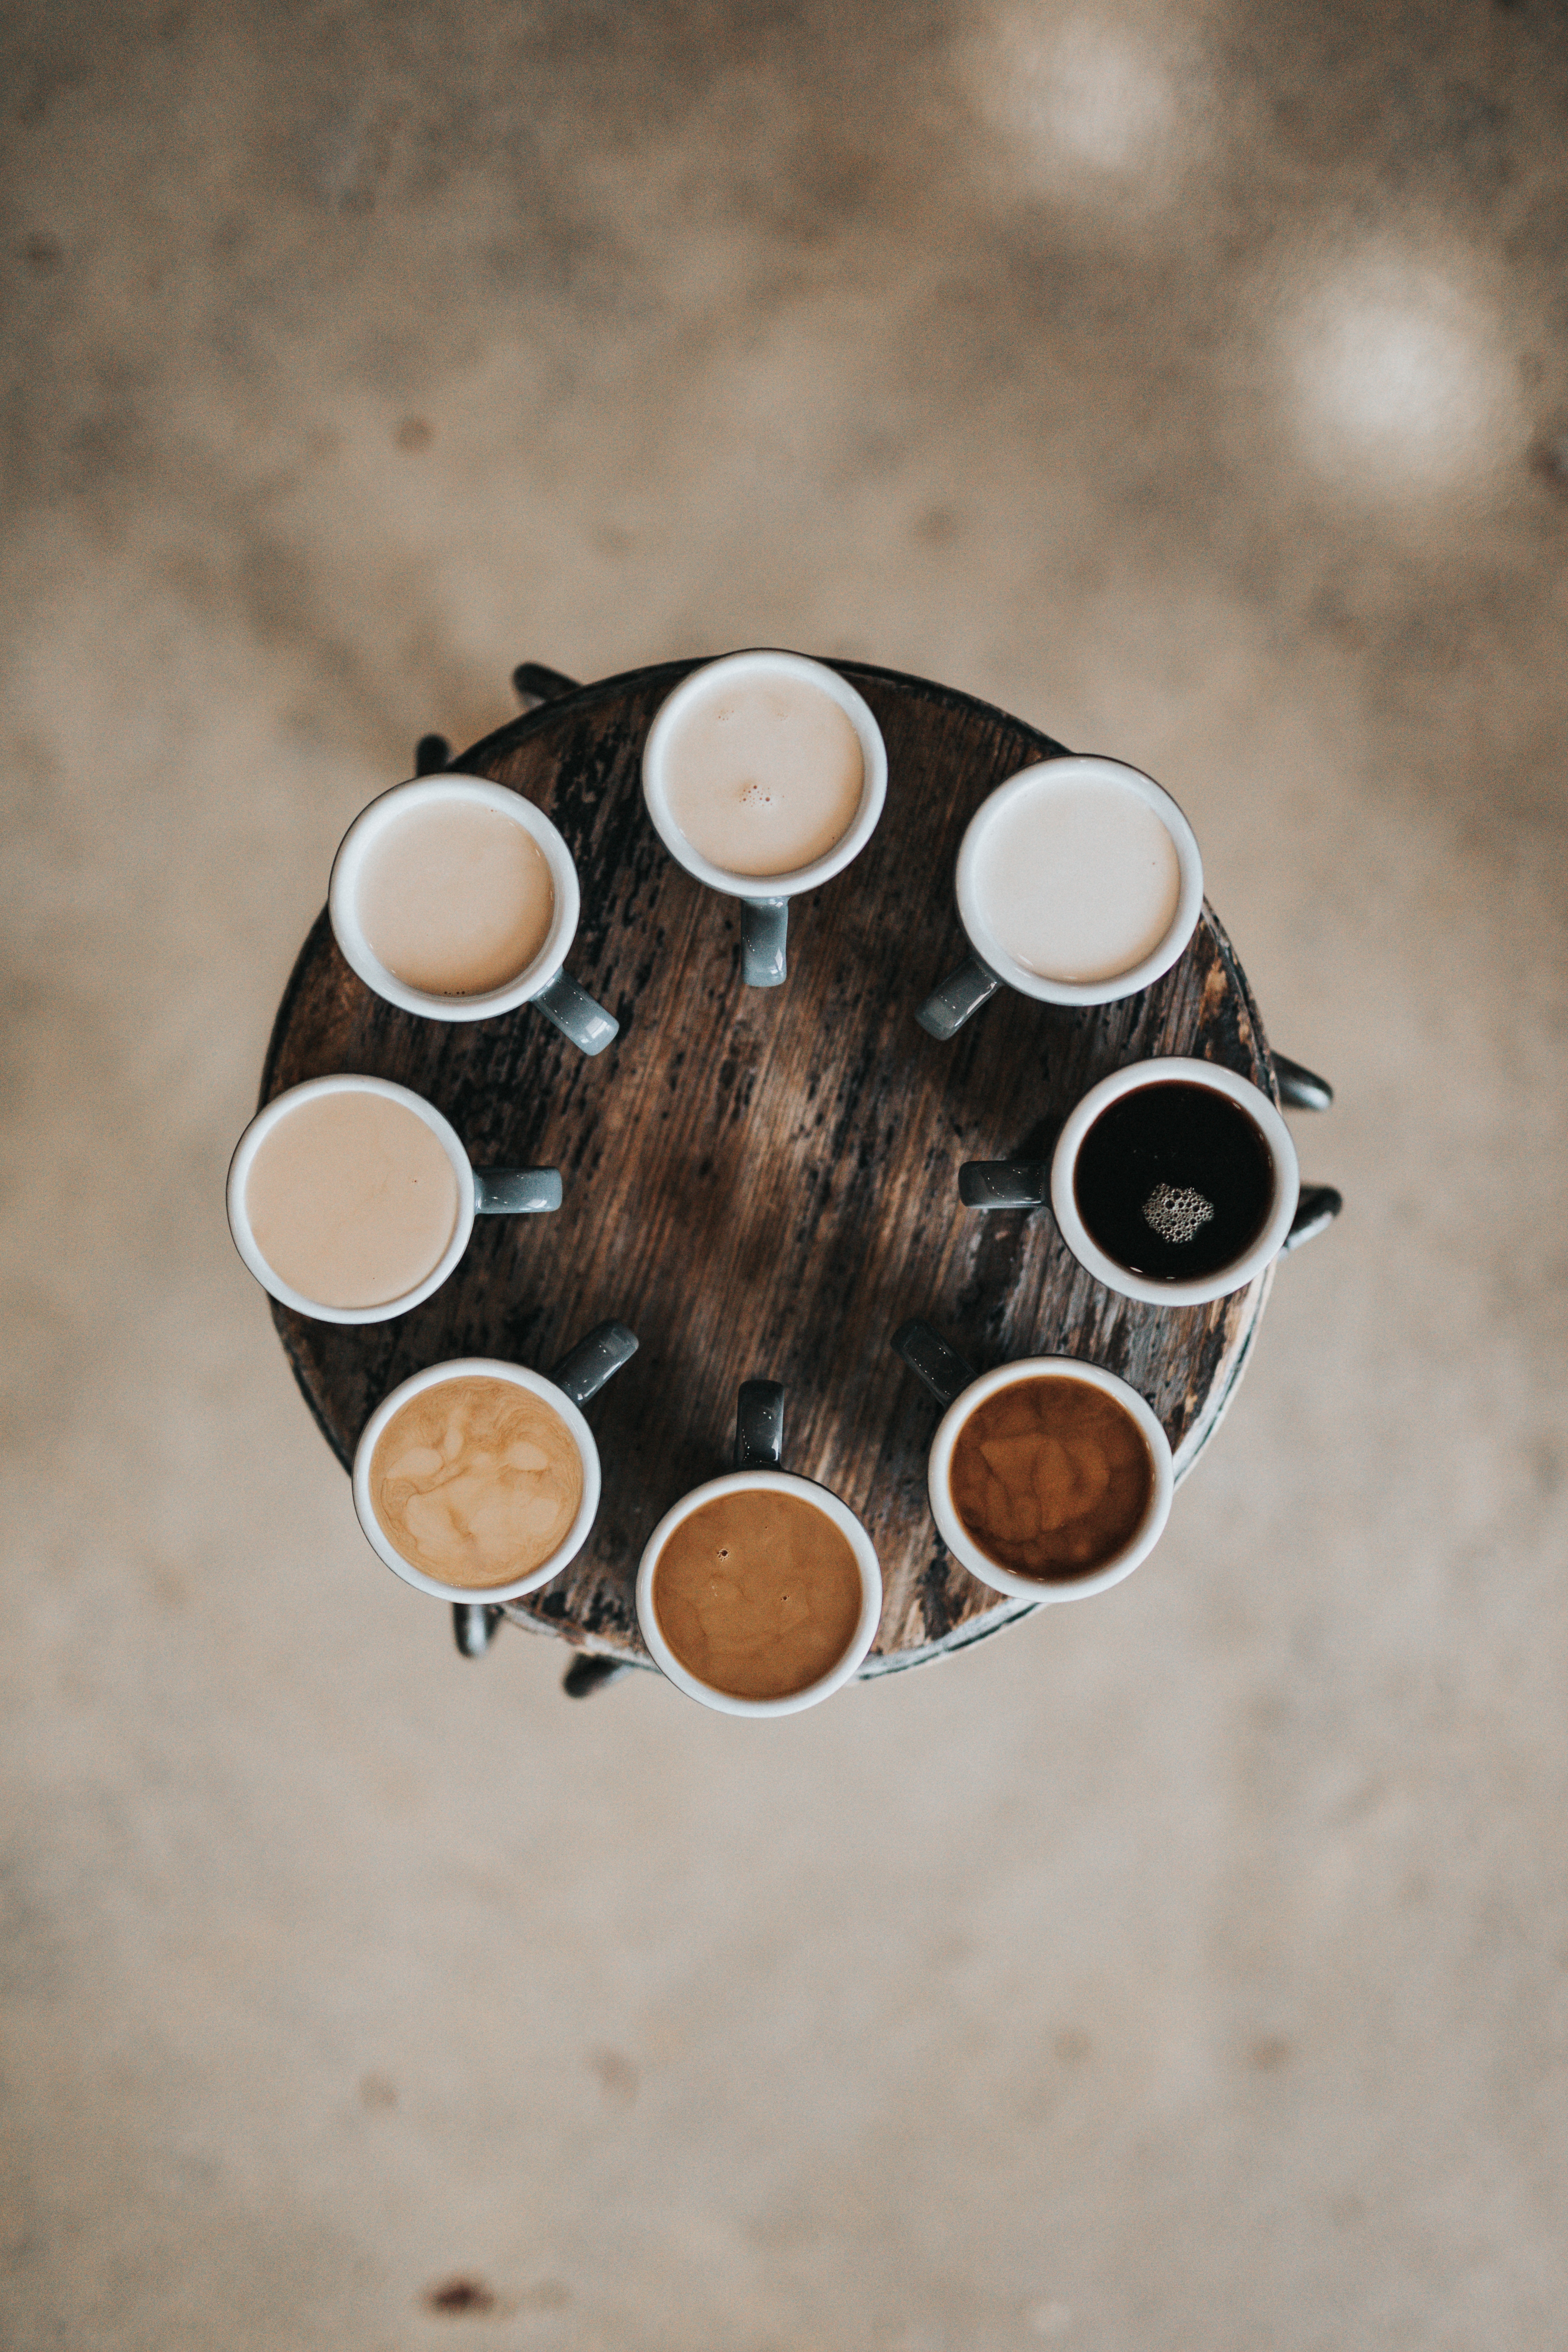 Cups of coffee on a round table in various shades due to creamer.